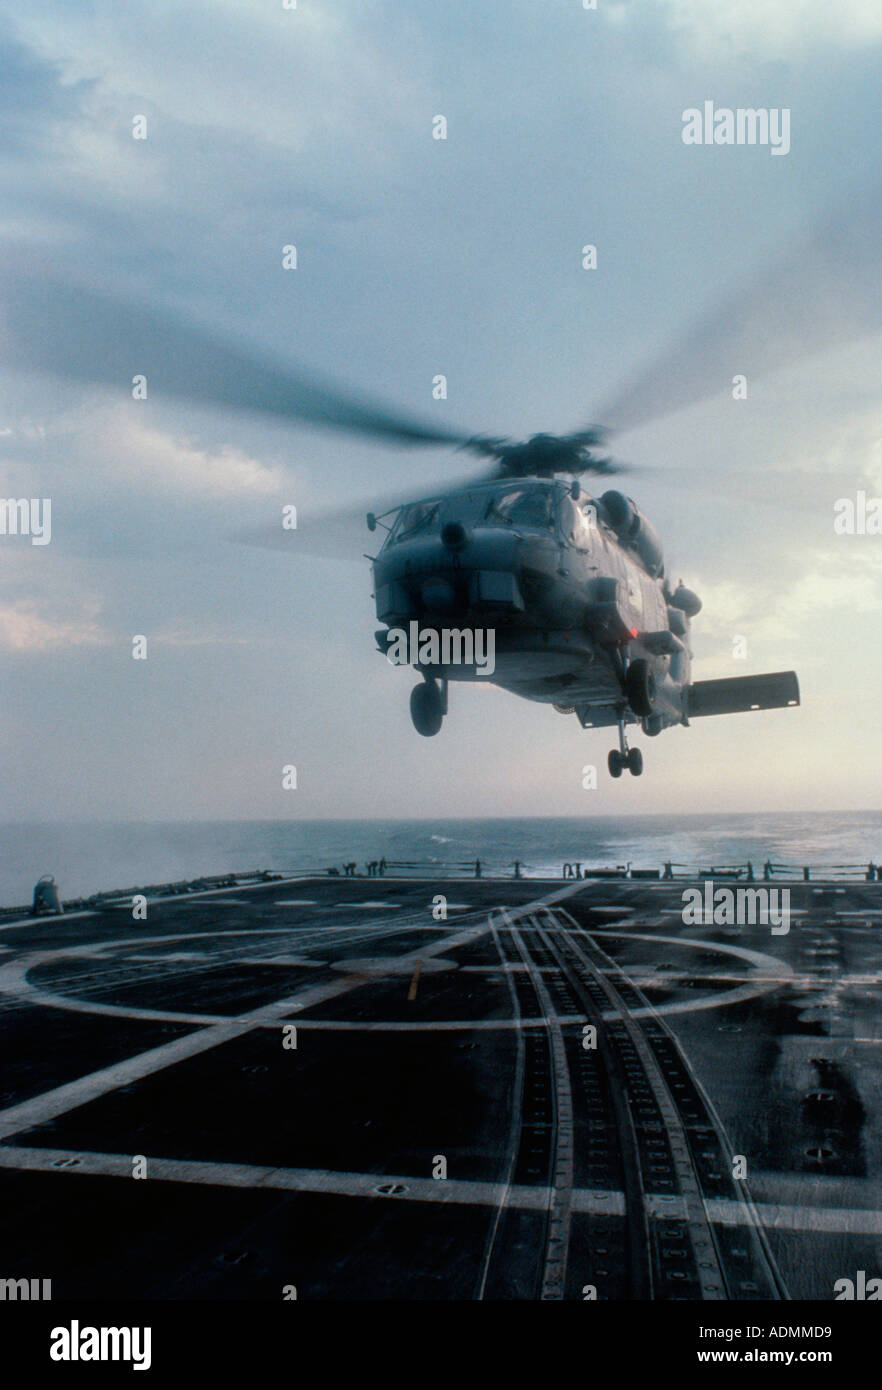 Low angle view of a SH-60B Sea Hawk helicopter landing on the deck of the USS Nicholas aircraft carrier Stock Photo